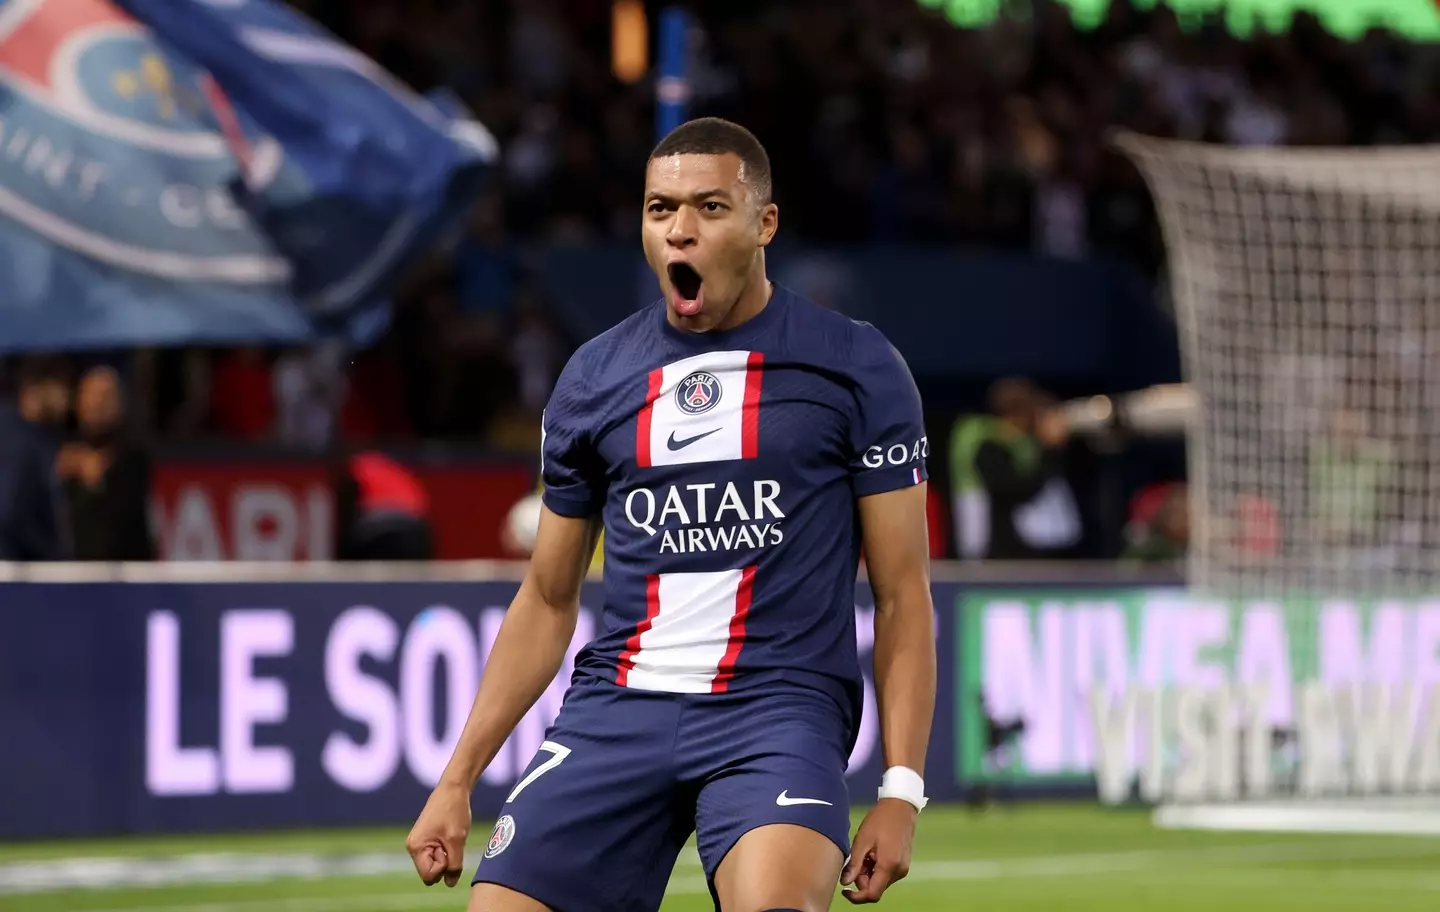 Mbappe could earn £546m if he remains at PSG for the duration of his three-year deal (Image: Alamy)